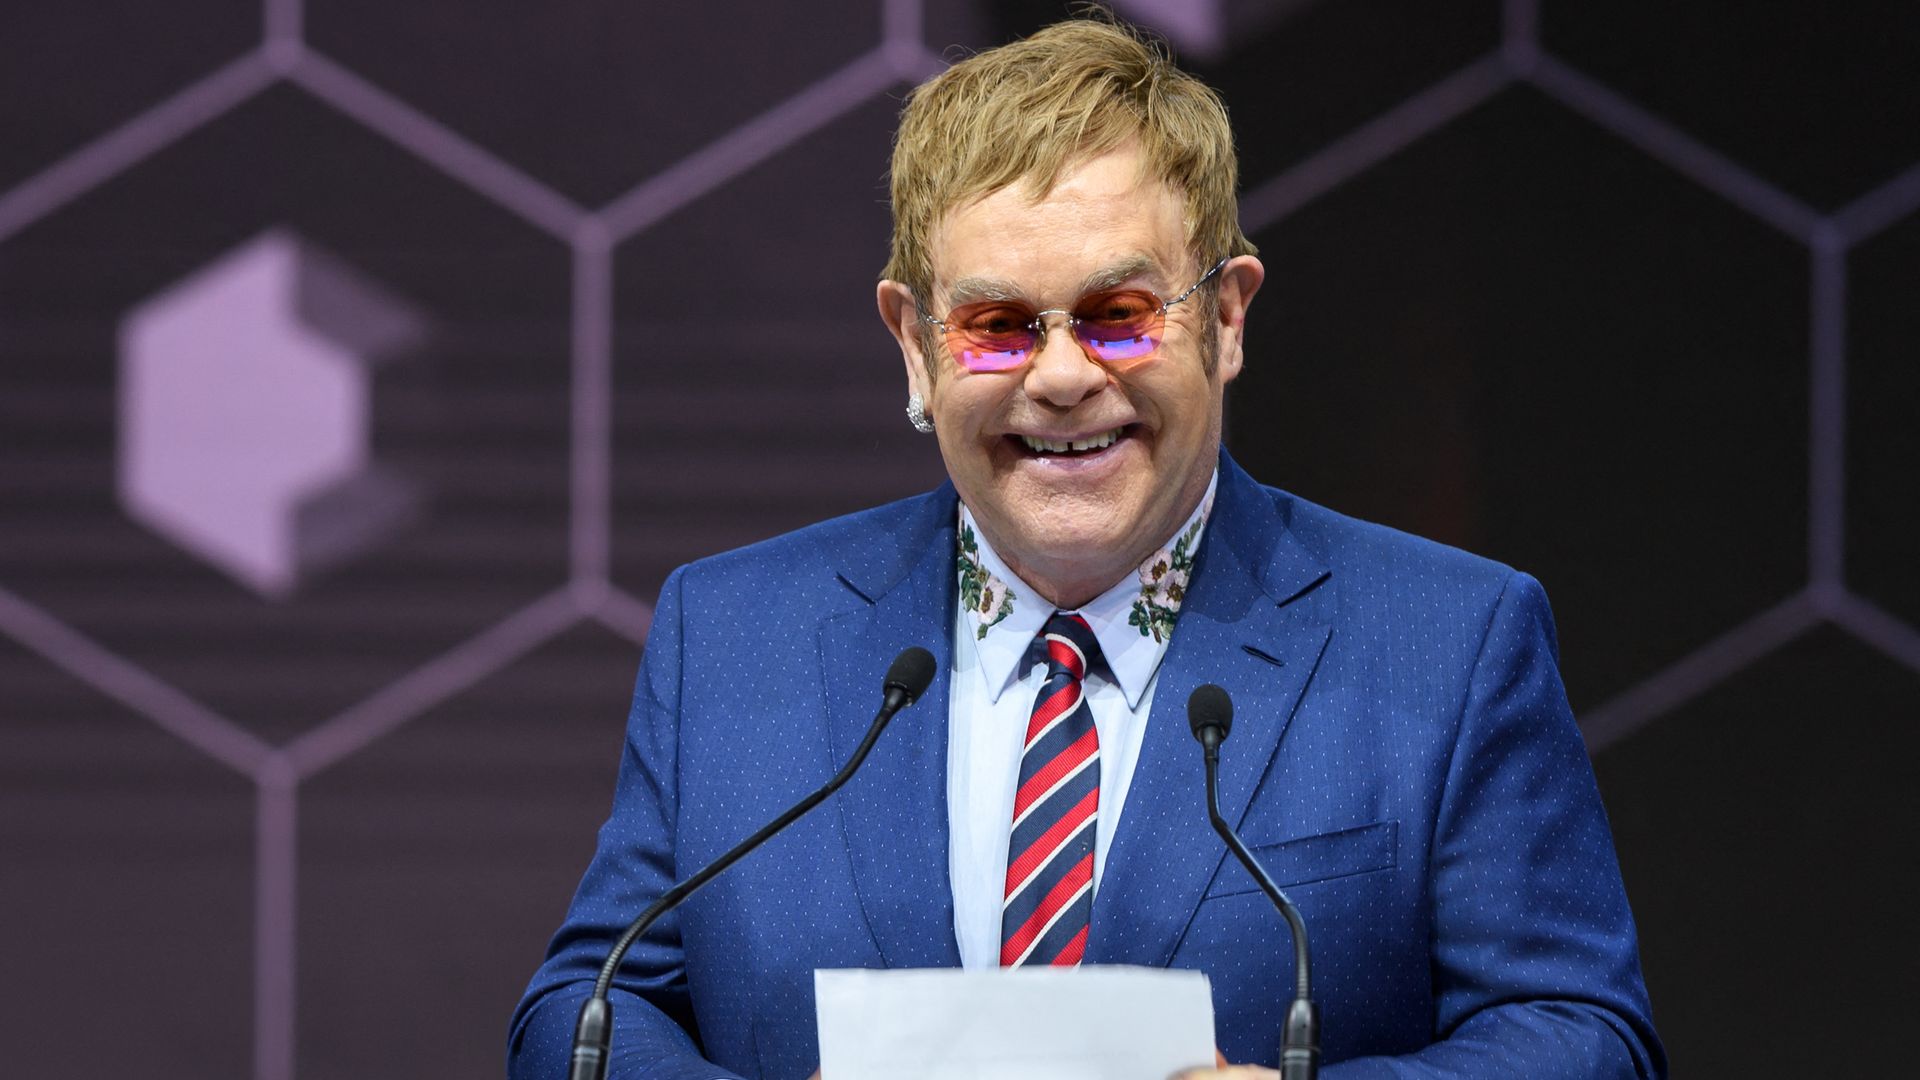 How Elton John discovered he had won an Emmy Award and was named EGOT